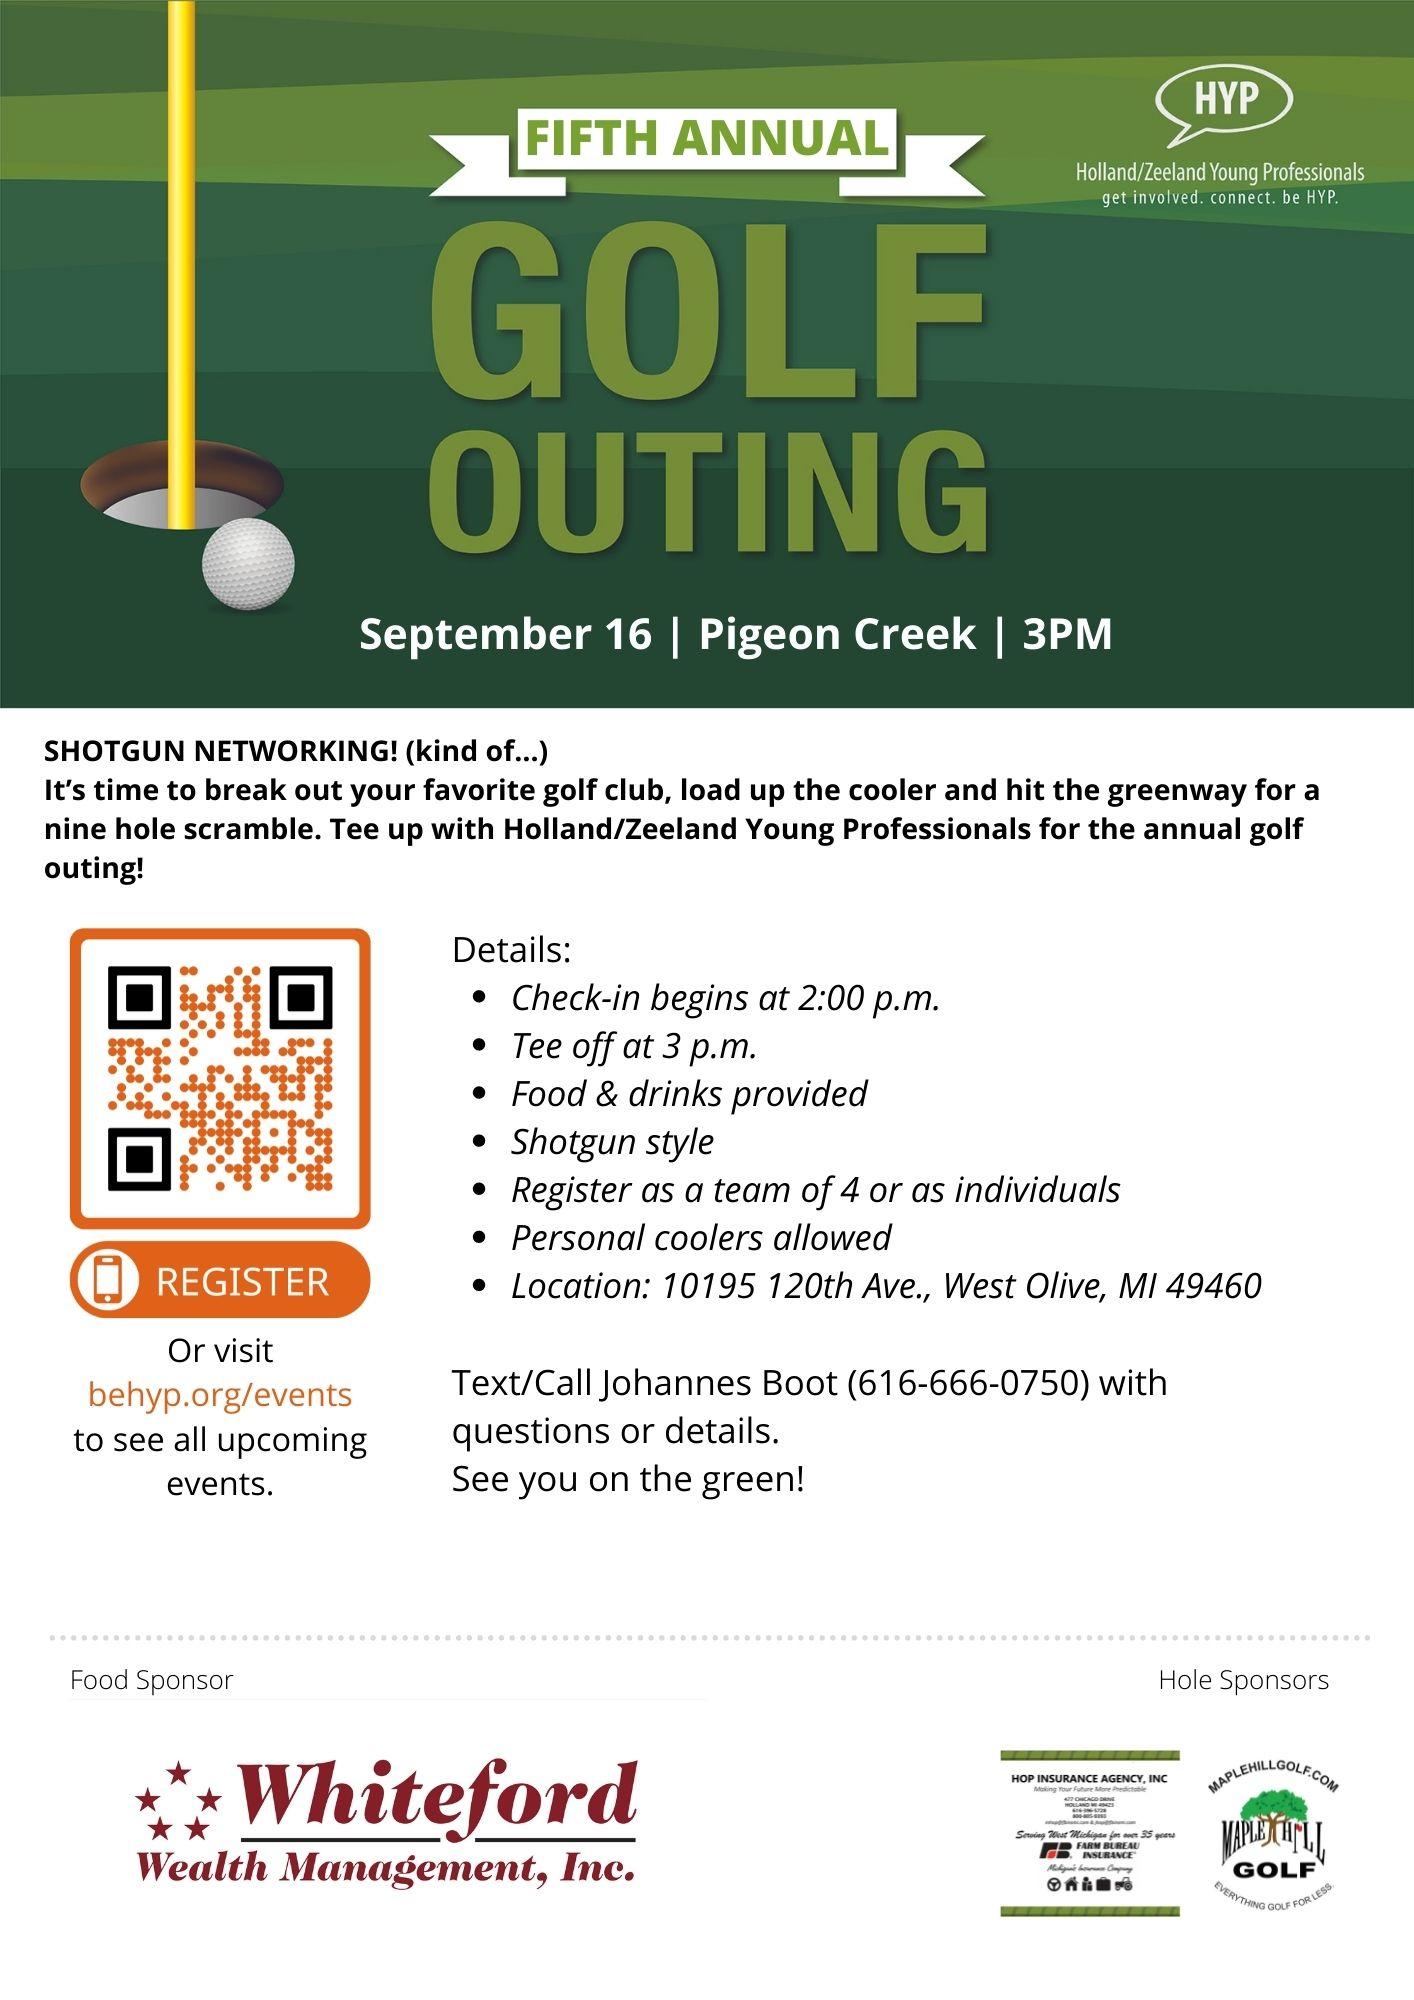 HYP Annual Golf Outing